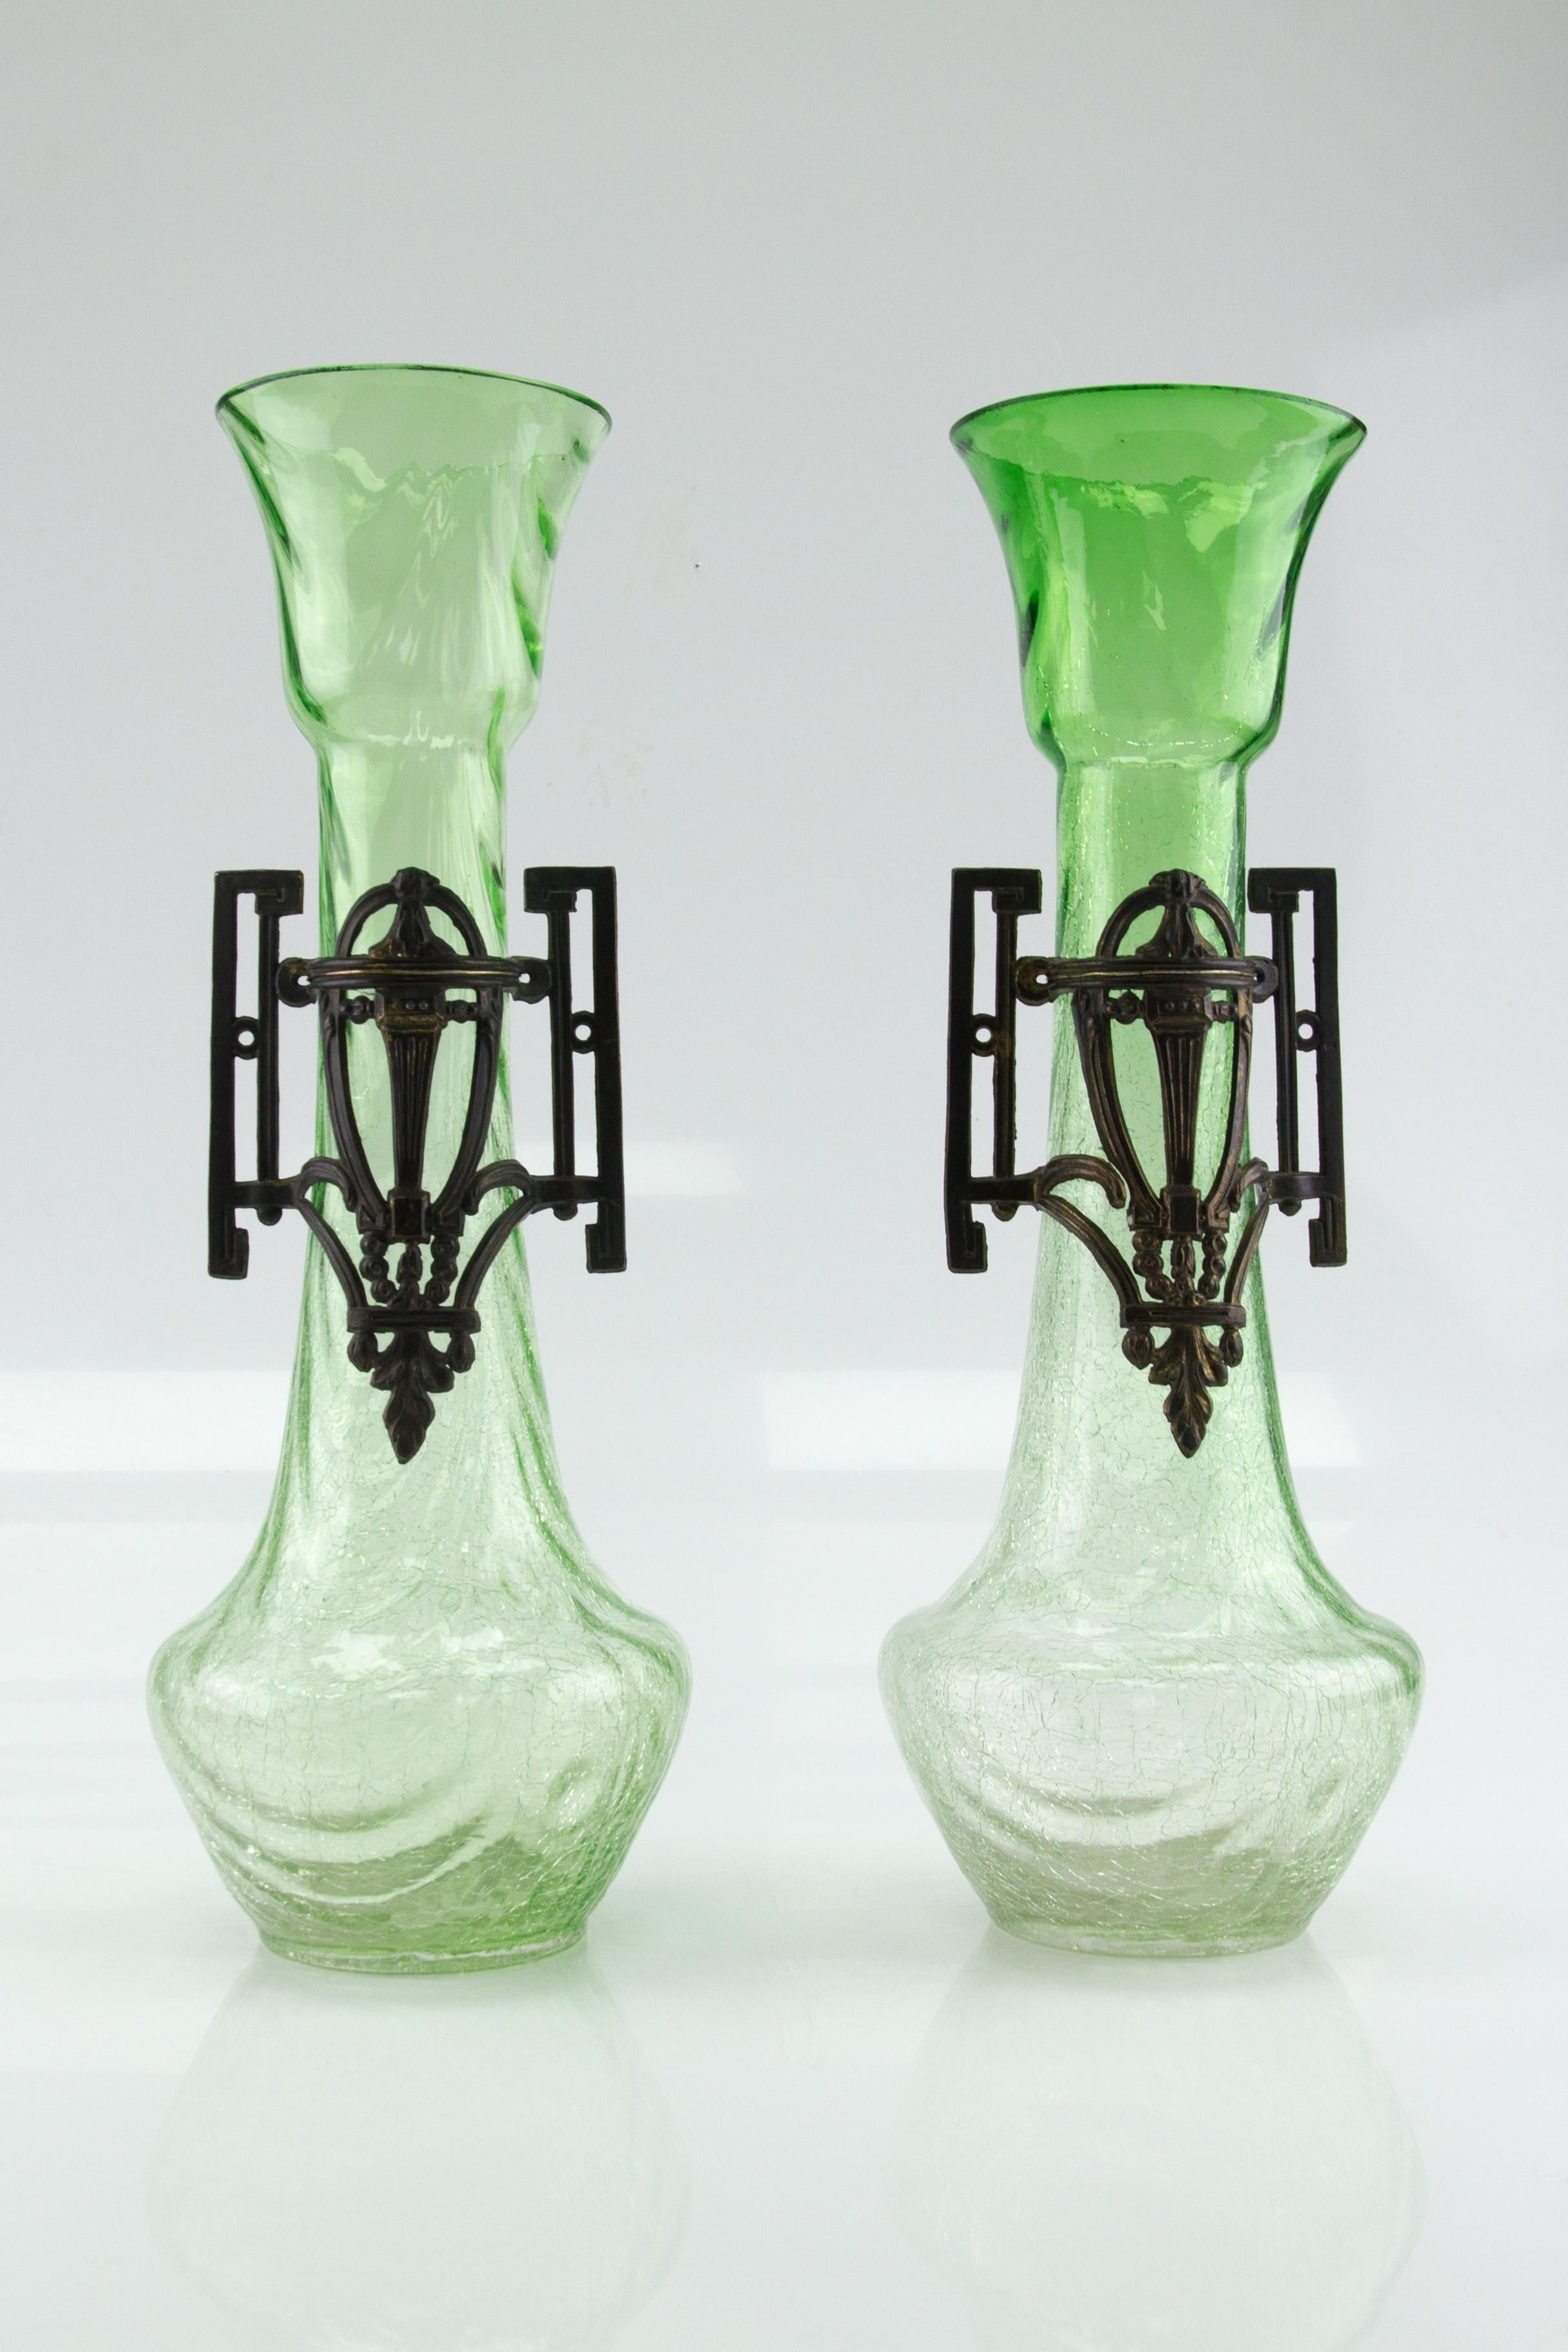 Pair of Large Art Nouveau Green Crackle Glass Vases, circa 1930s For Sale 5